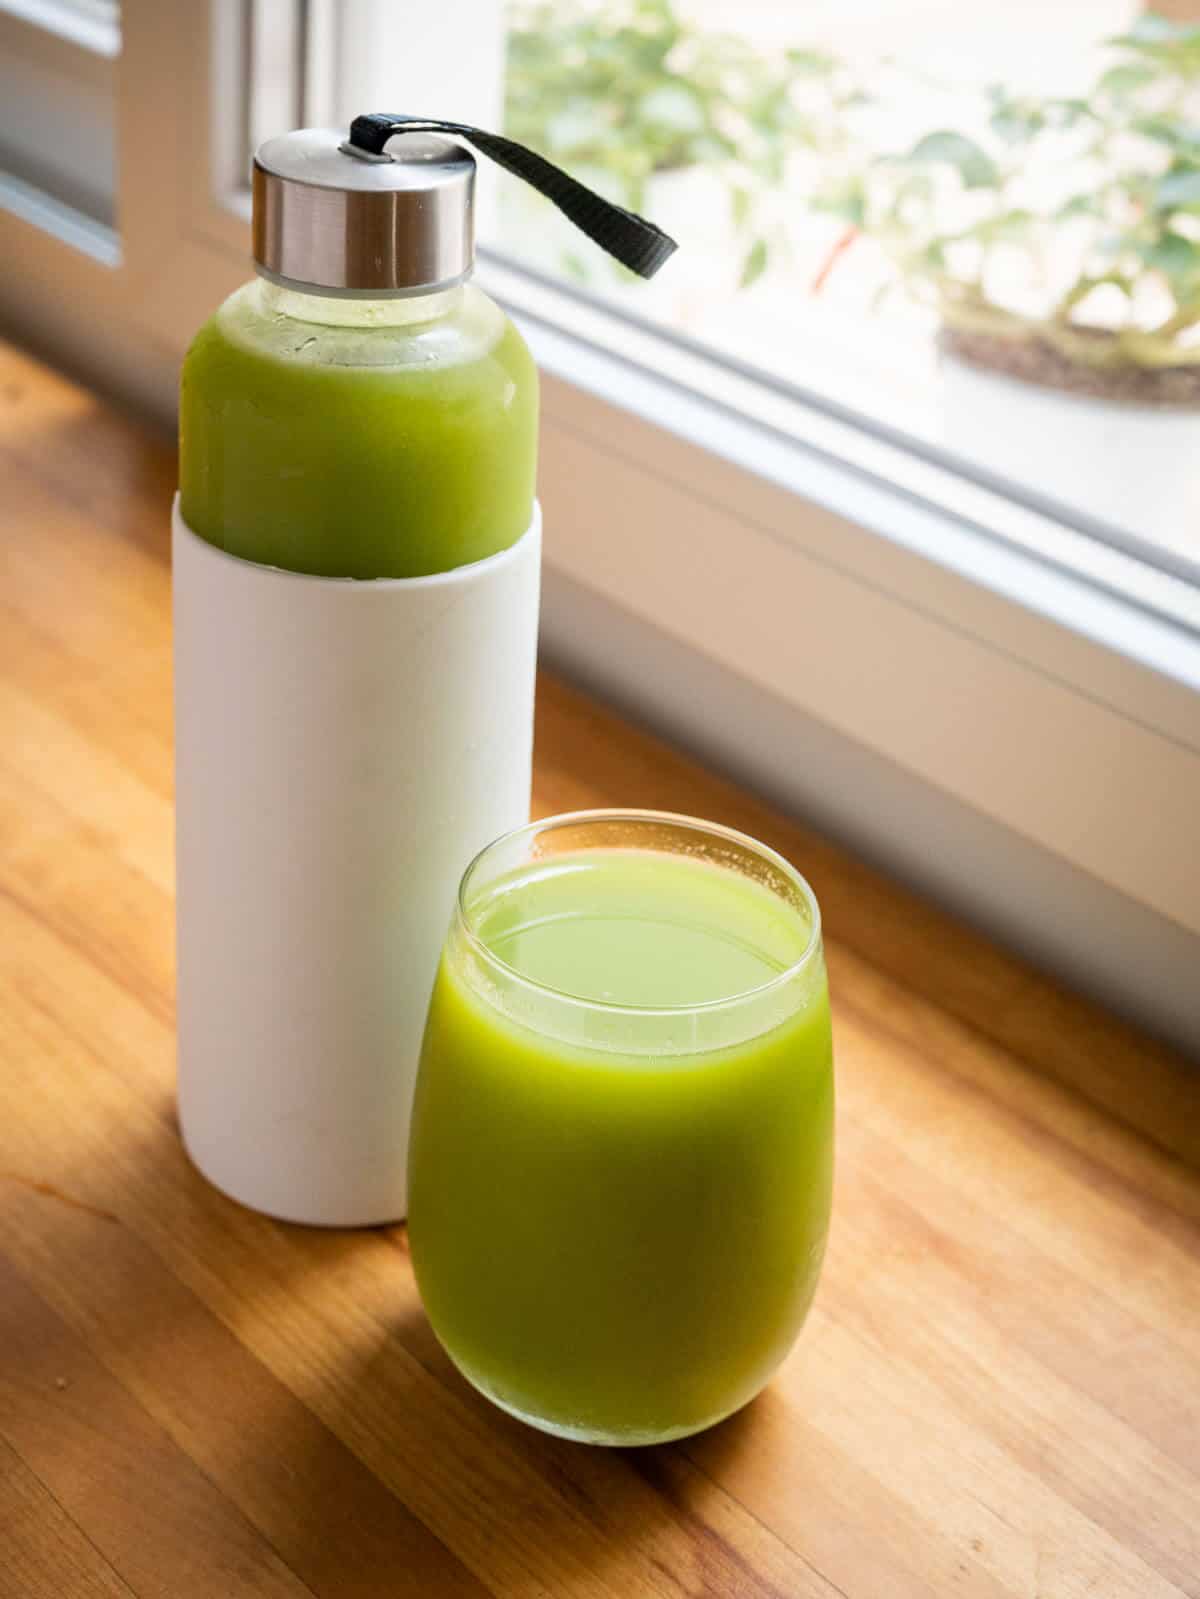 celery juice glass and a container with stored celery juice.